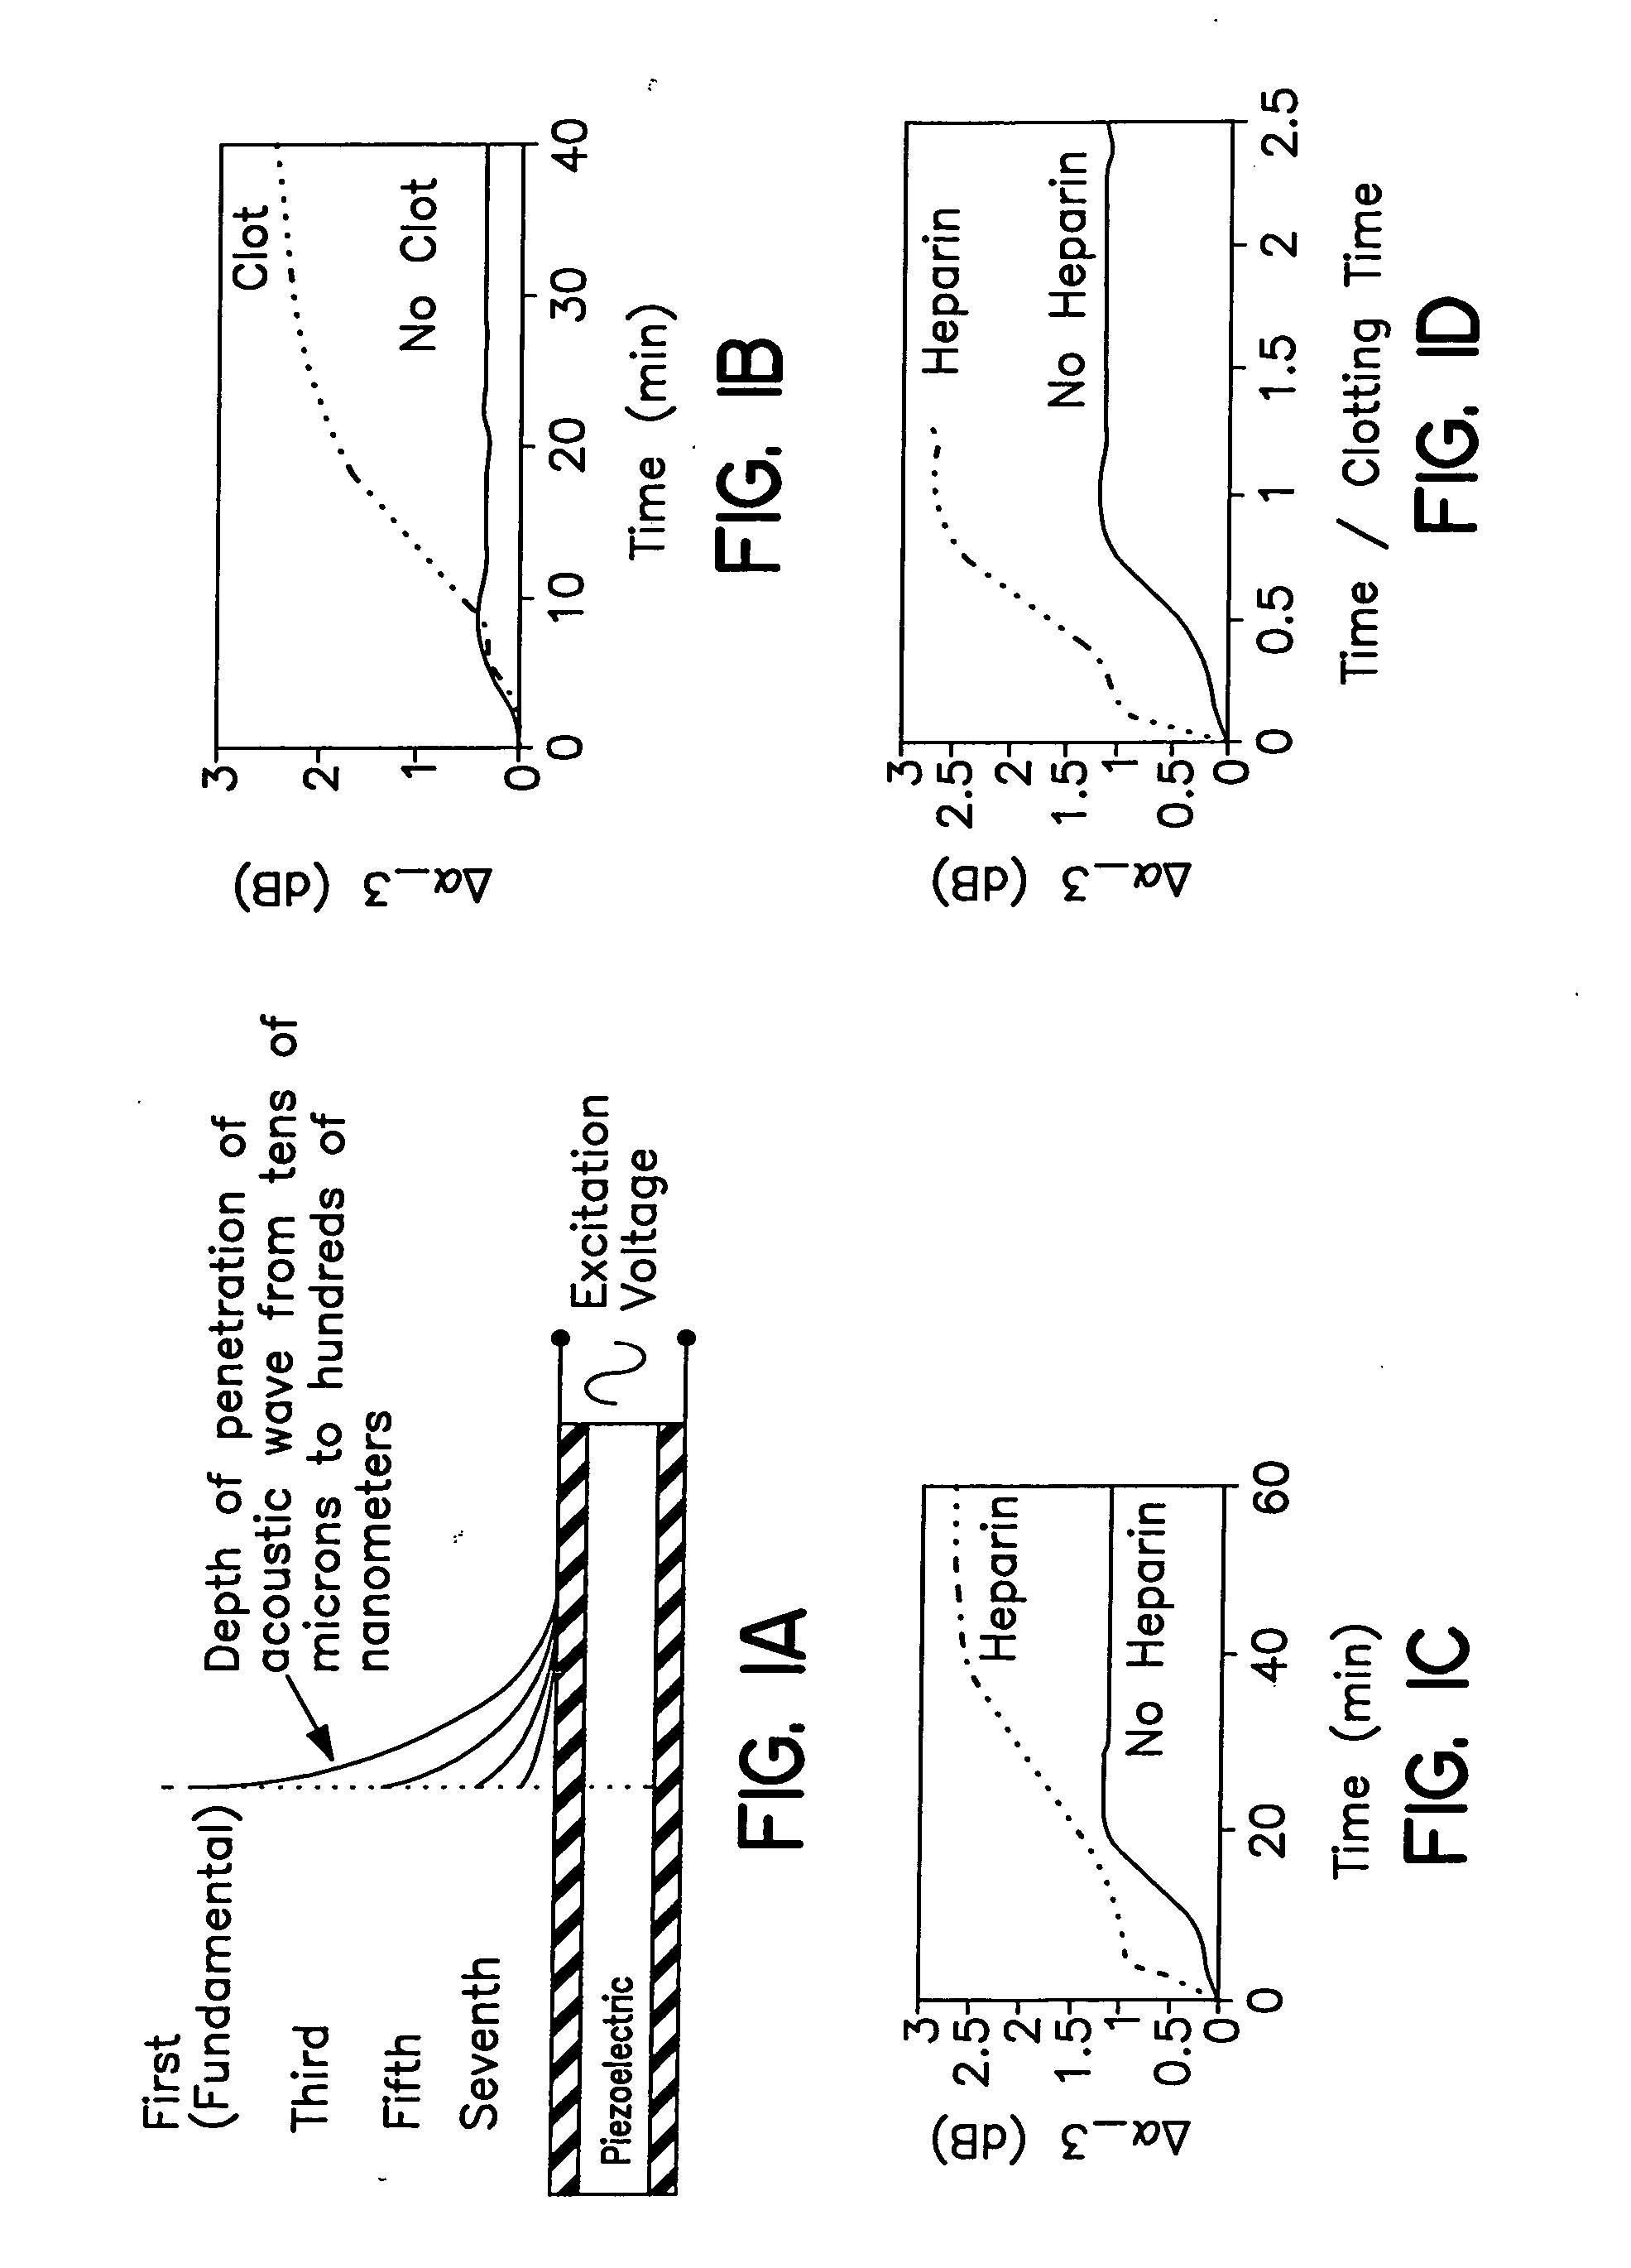 Acoustic blood analyzer for assessing blood properties